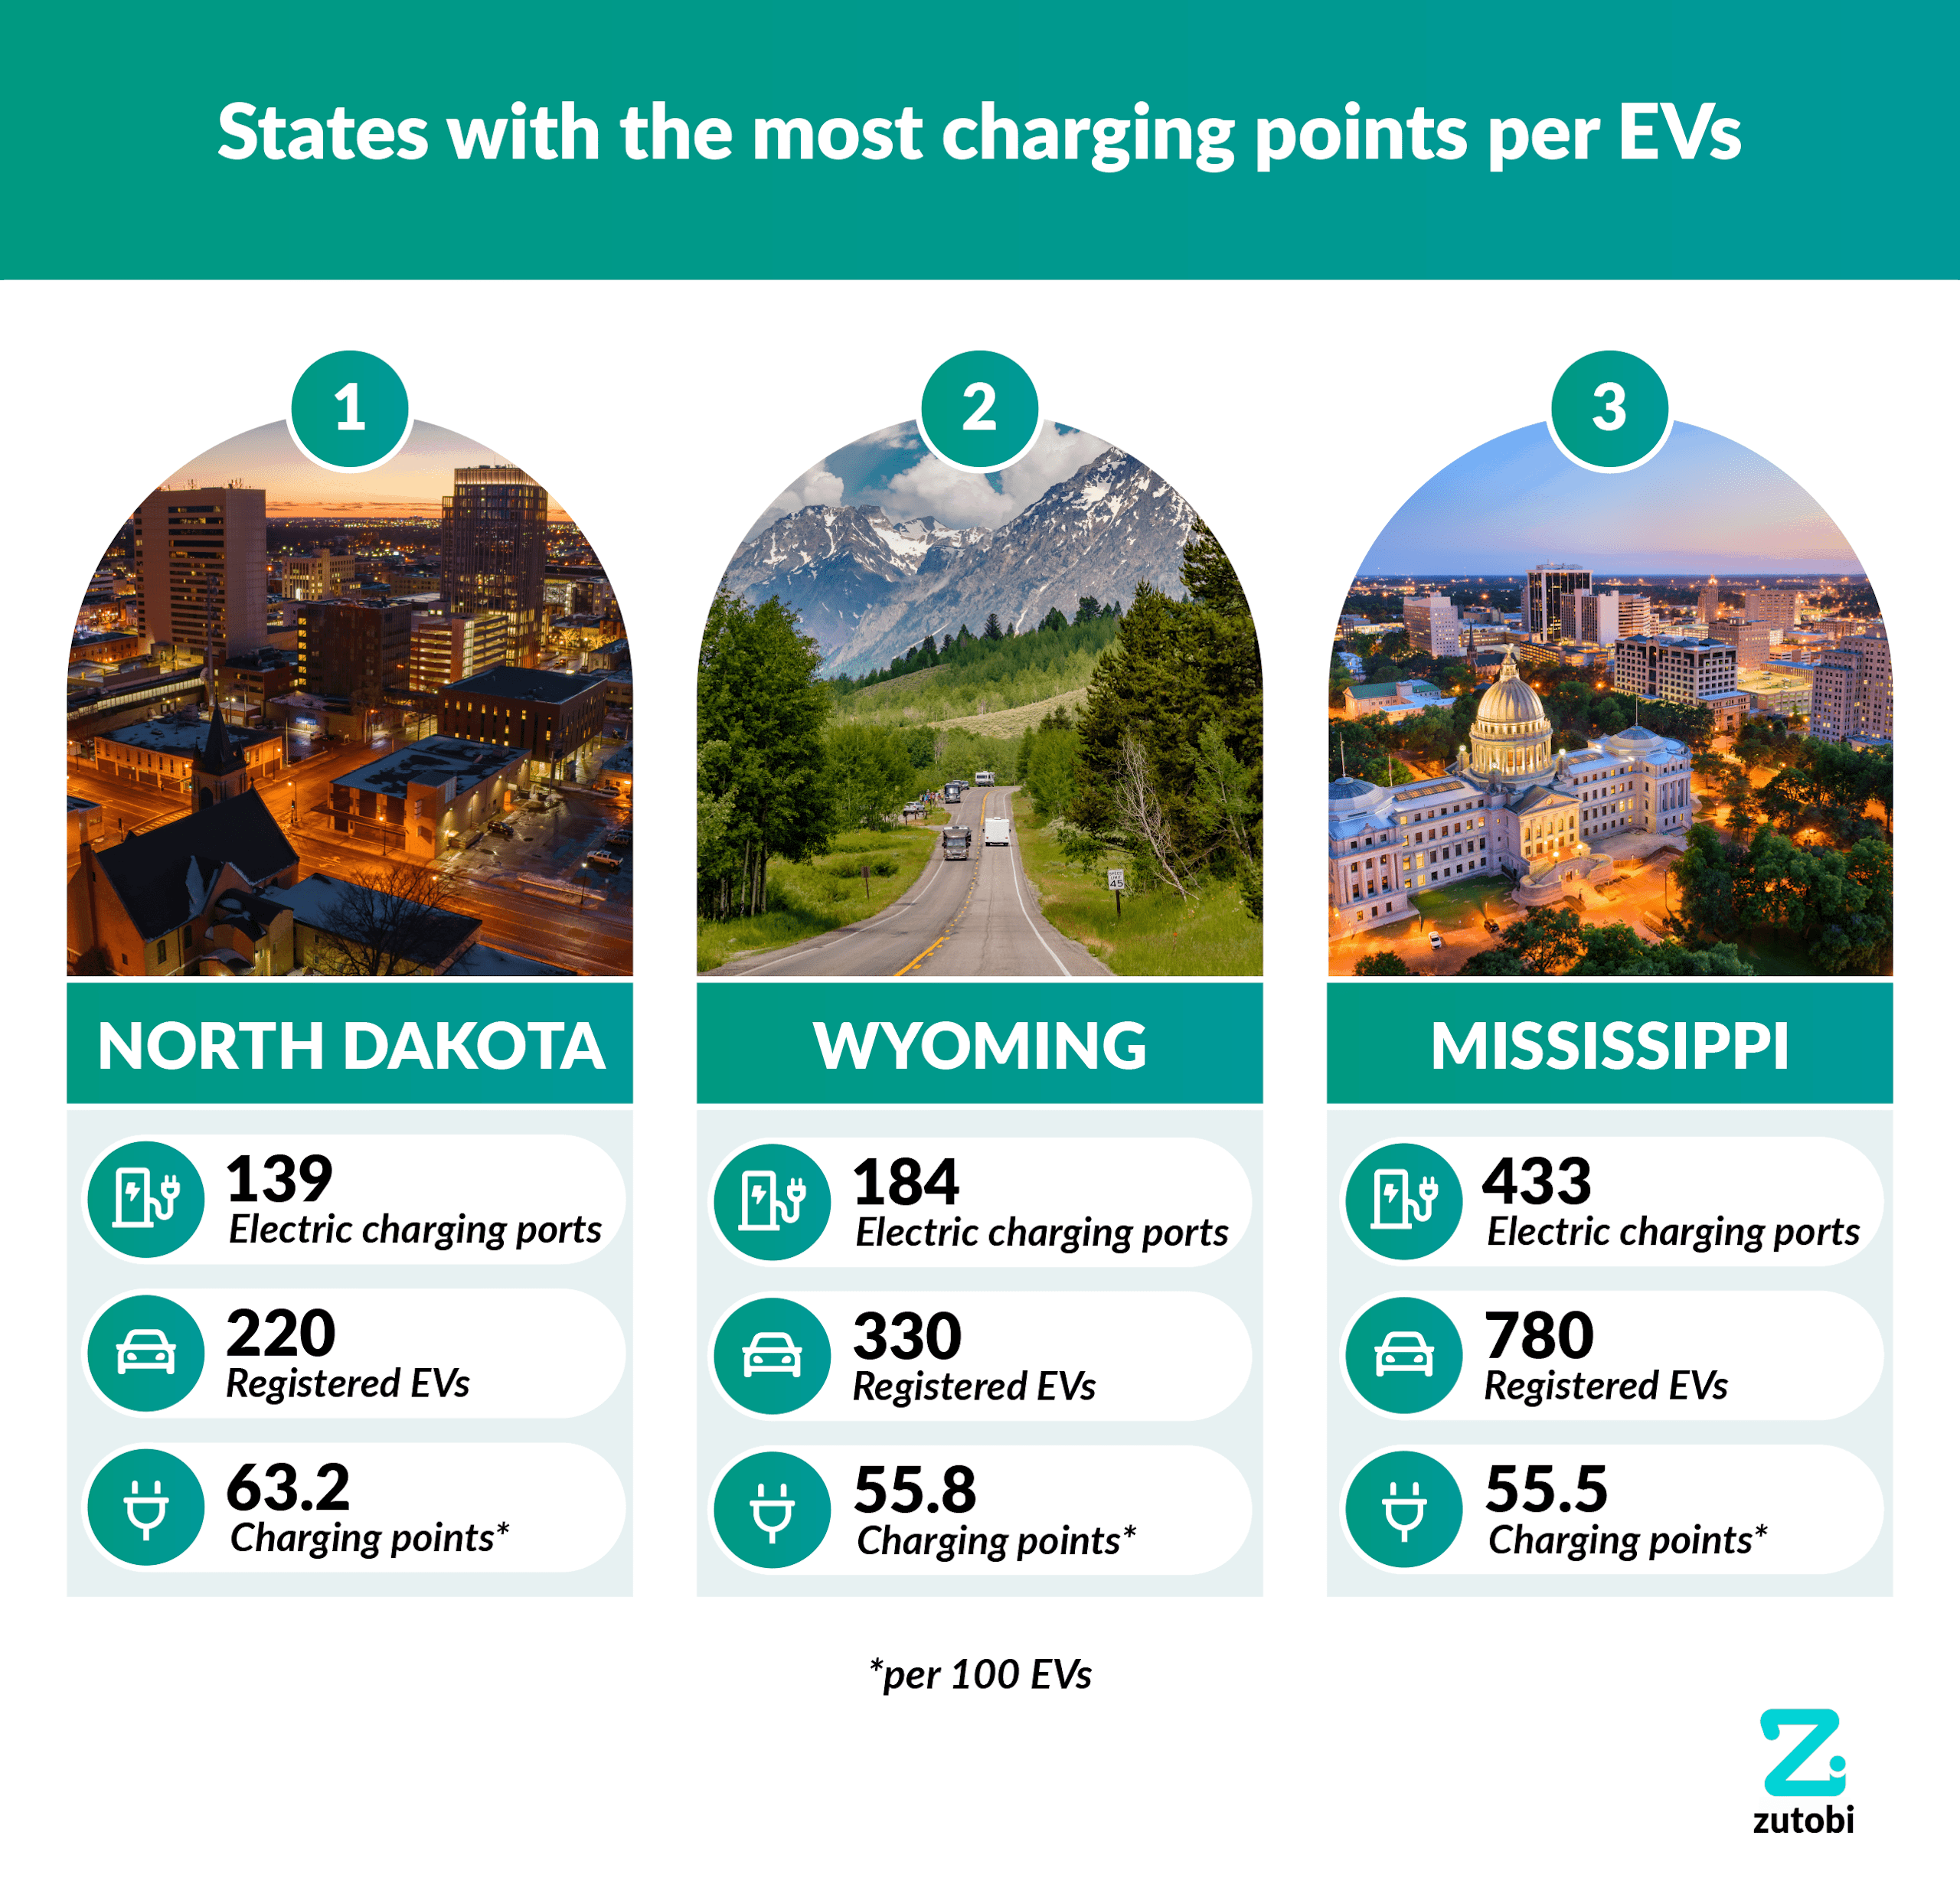 States with the most charging stations per EVs